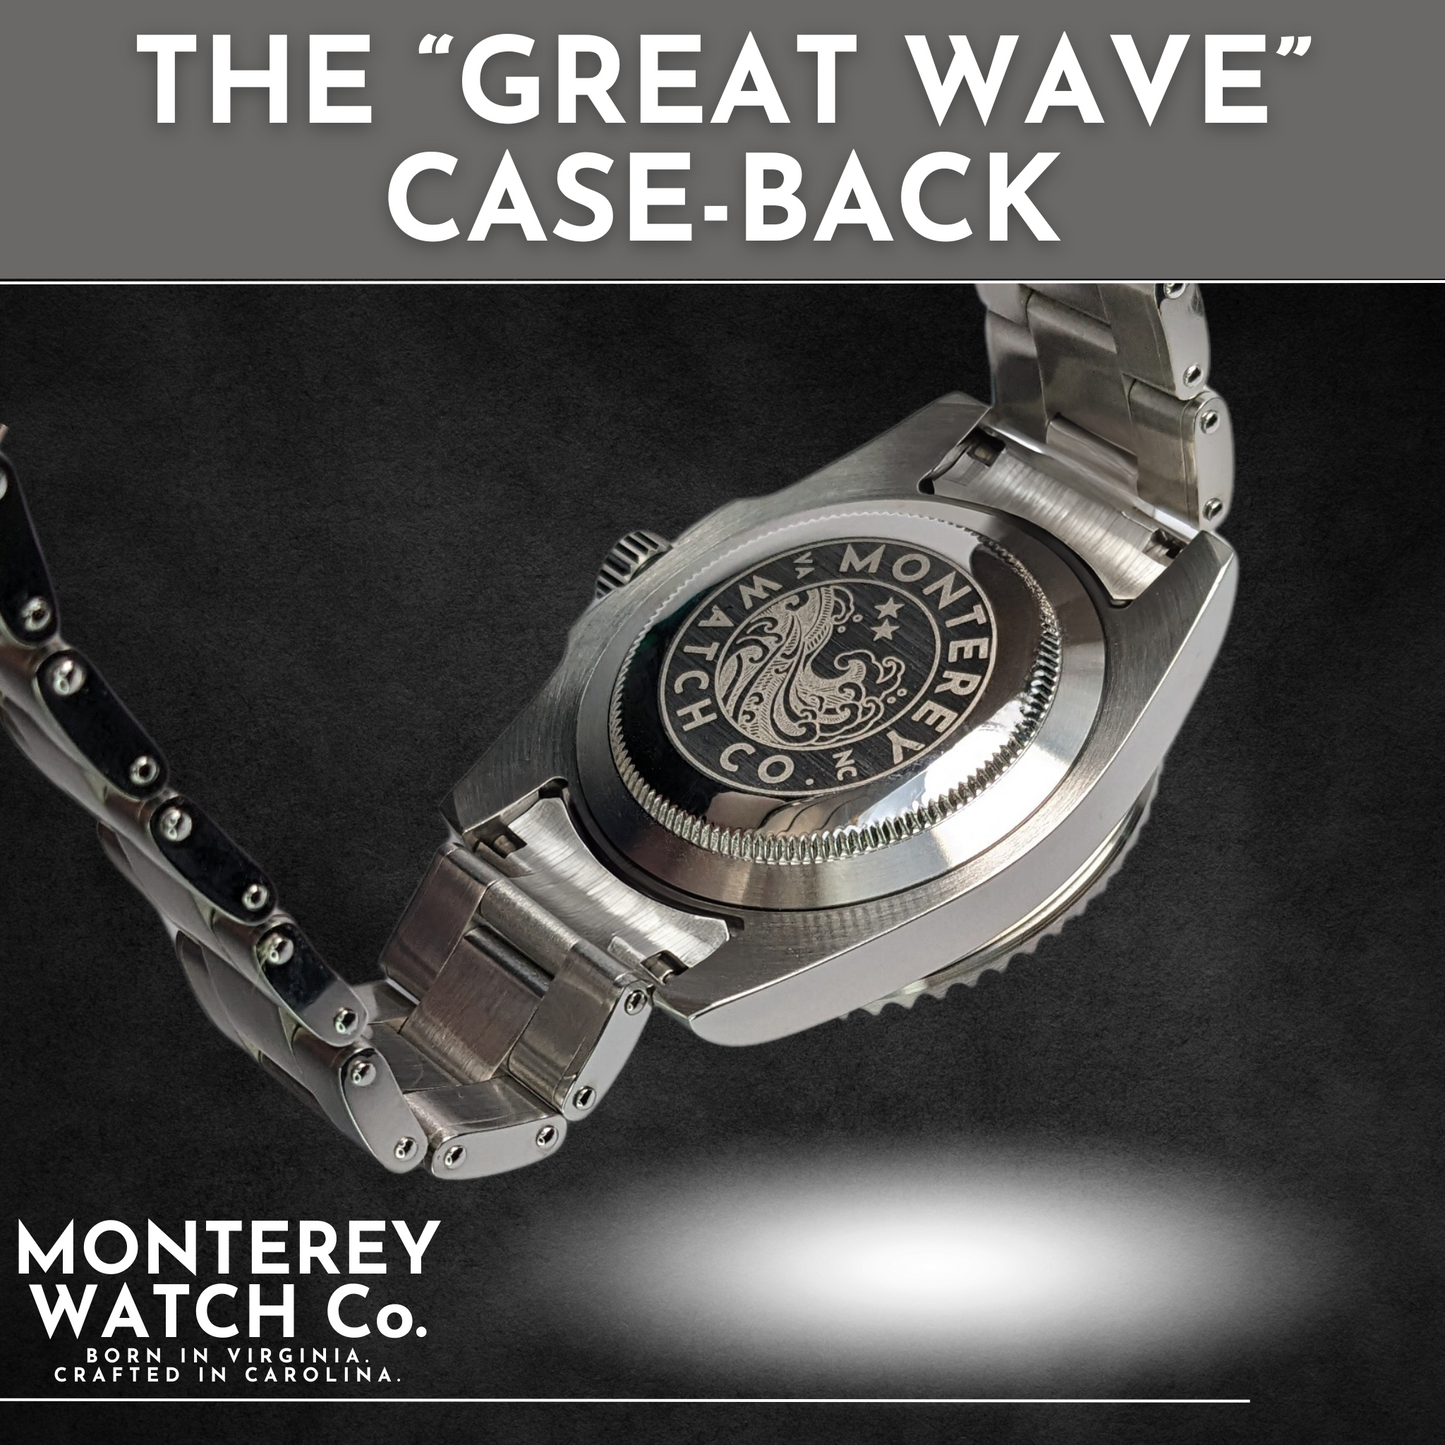 The Great White JTR Watch Collection | Luxury Timepiece | Monterey Watch Co